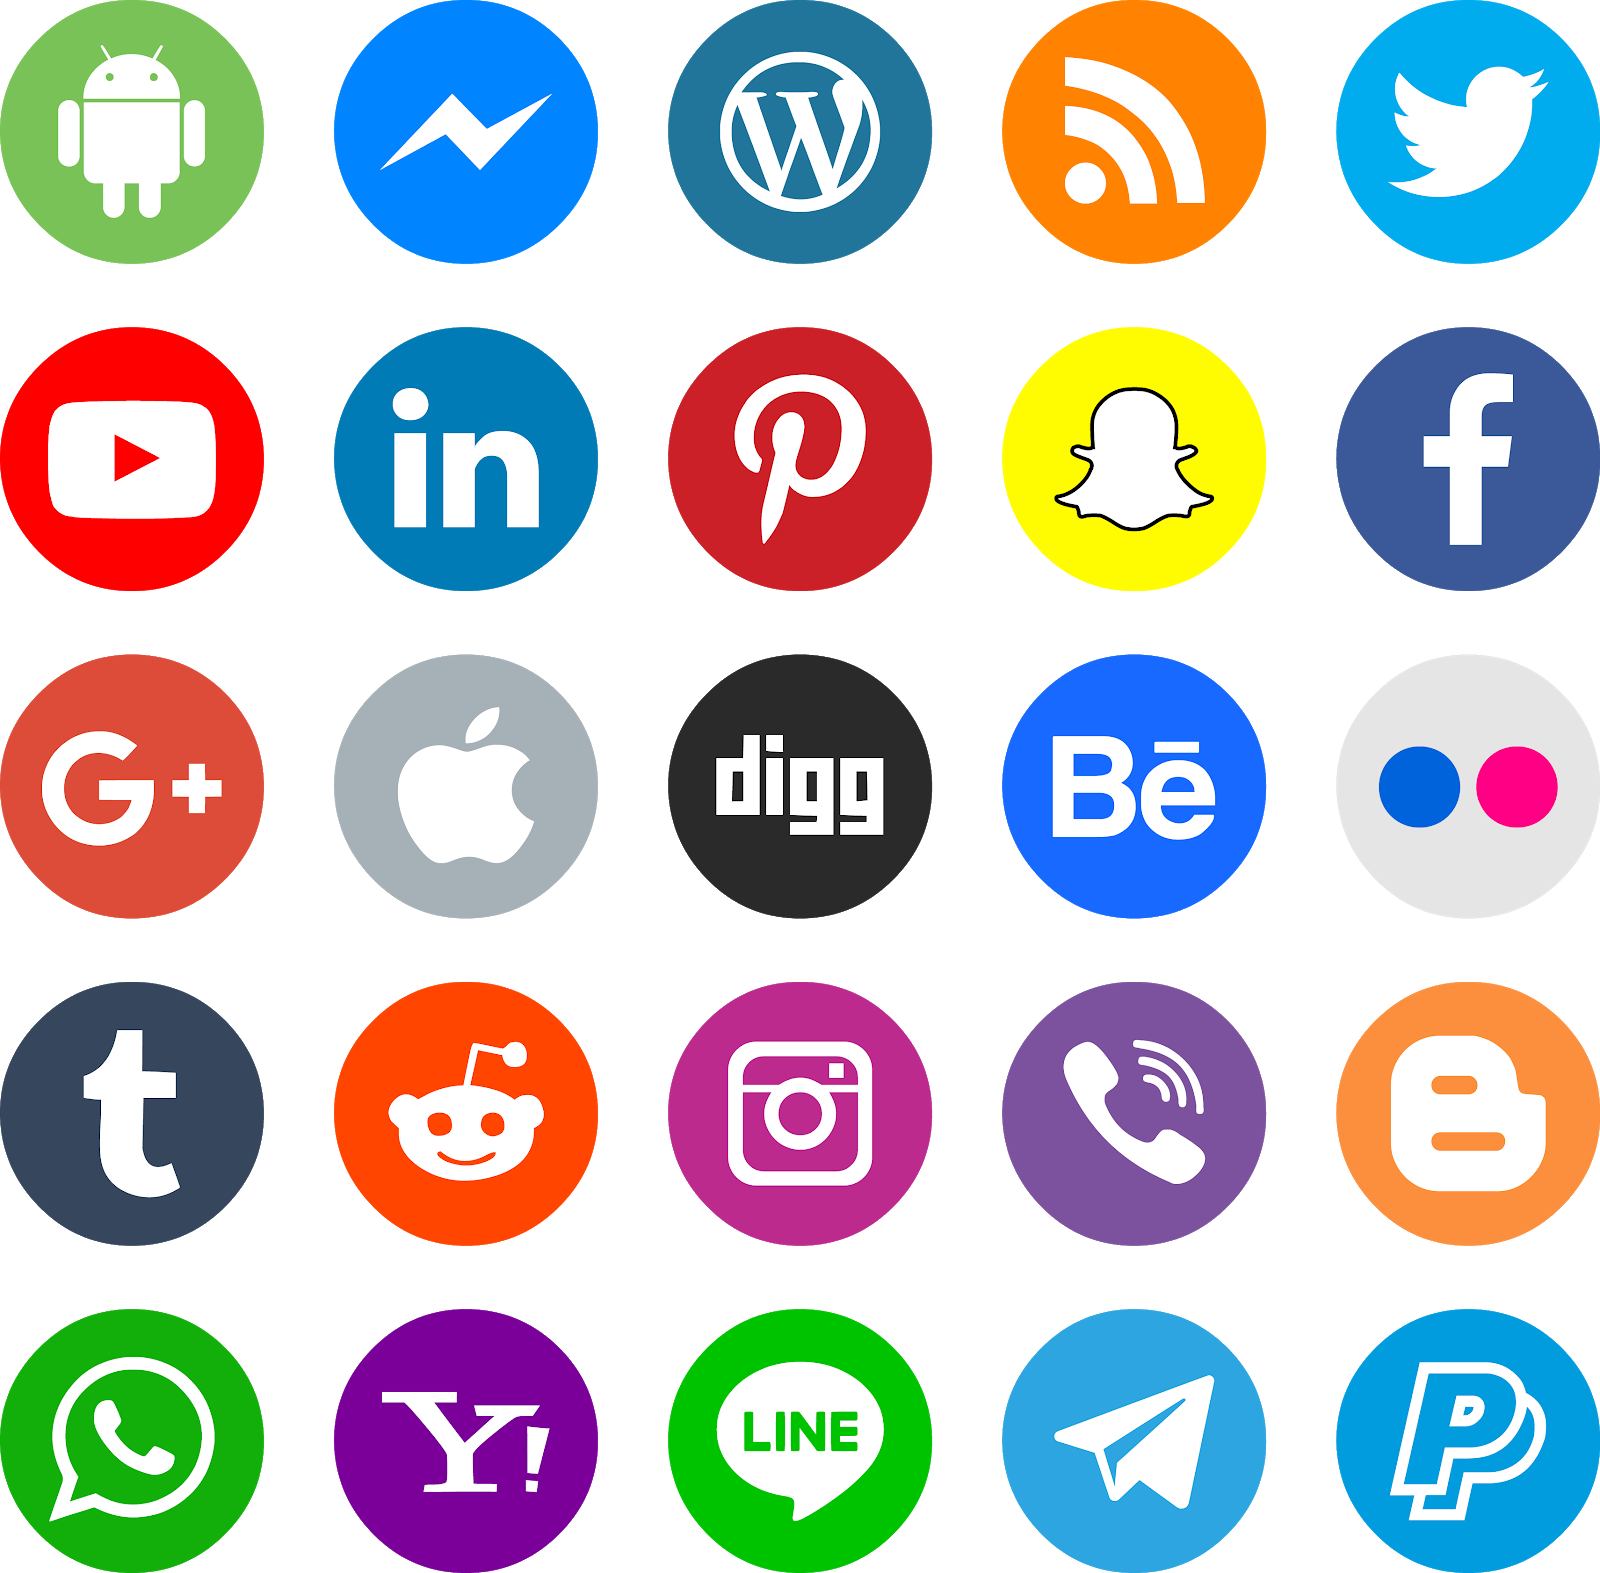 download icons social media color vector svg eps png psd ai.